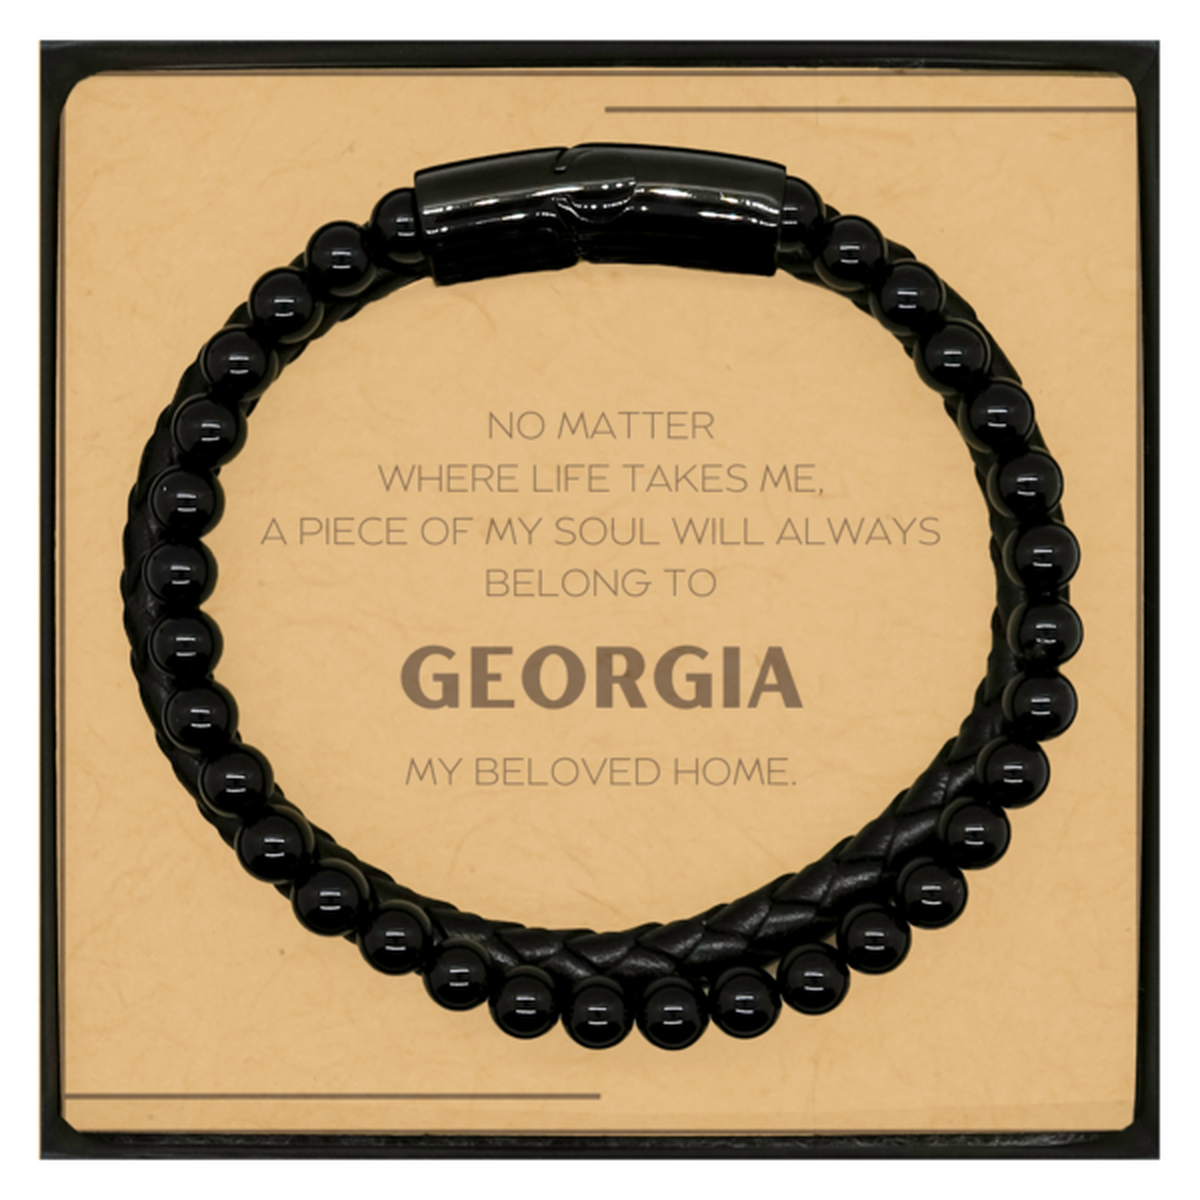 Love Georgia State Gifts, My soul will always belong to Georgia, Proud Stone Leather Bracelets, Birthday Christmas Unique Gifts For Georgia Men, Women, Friends